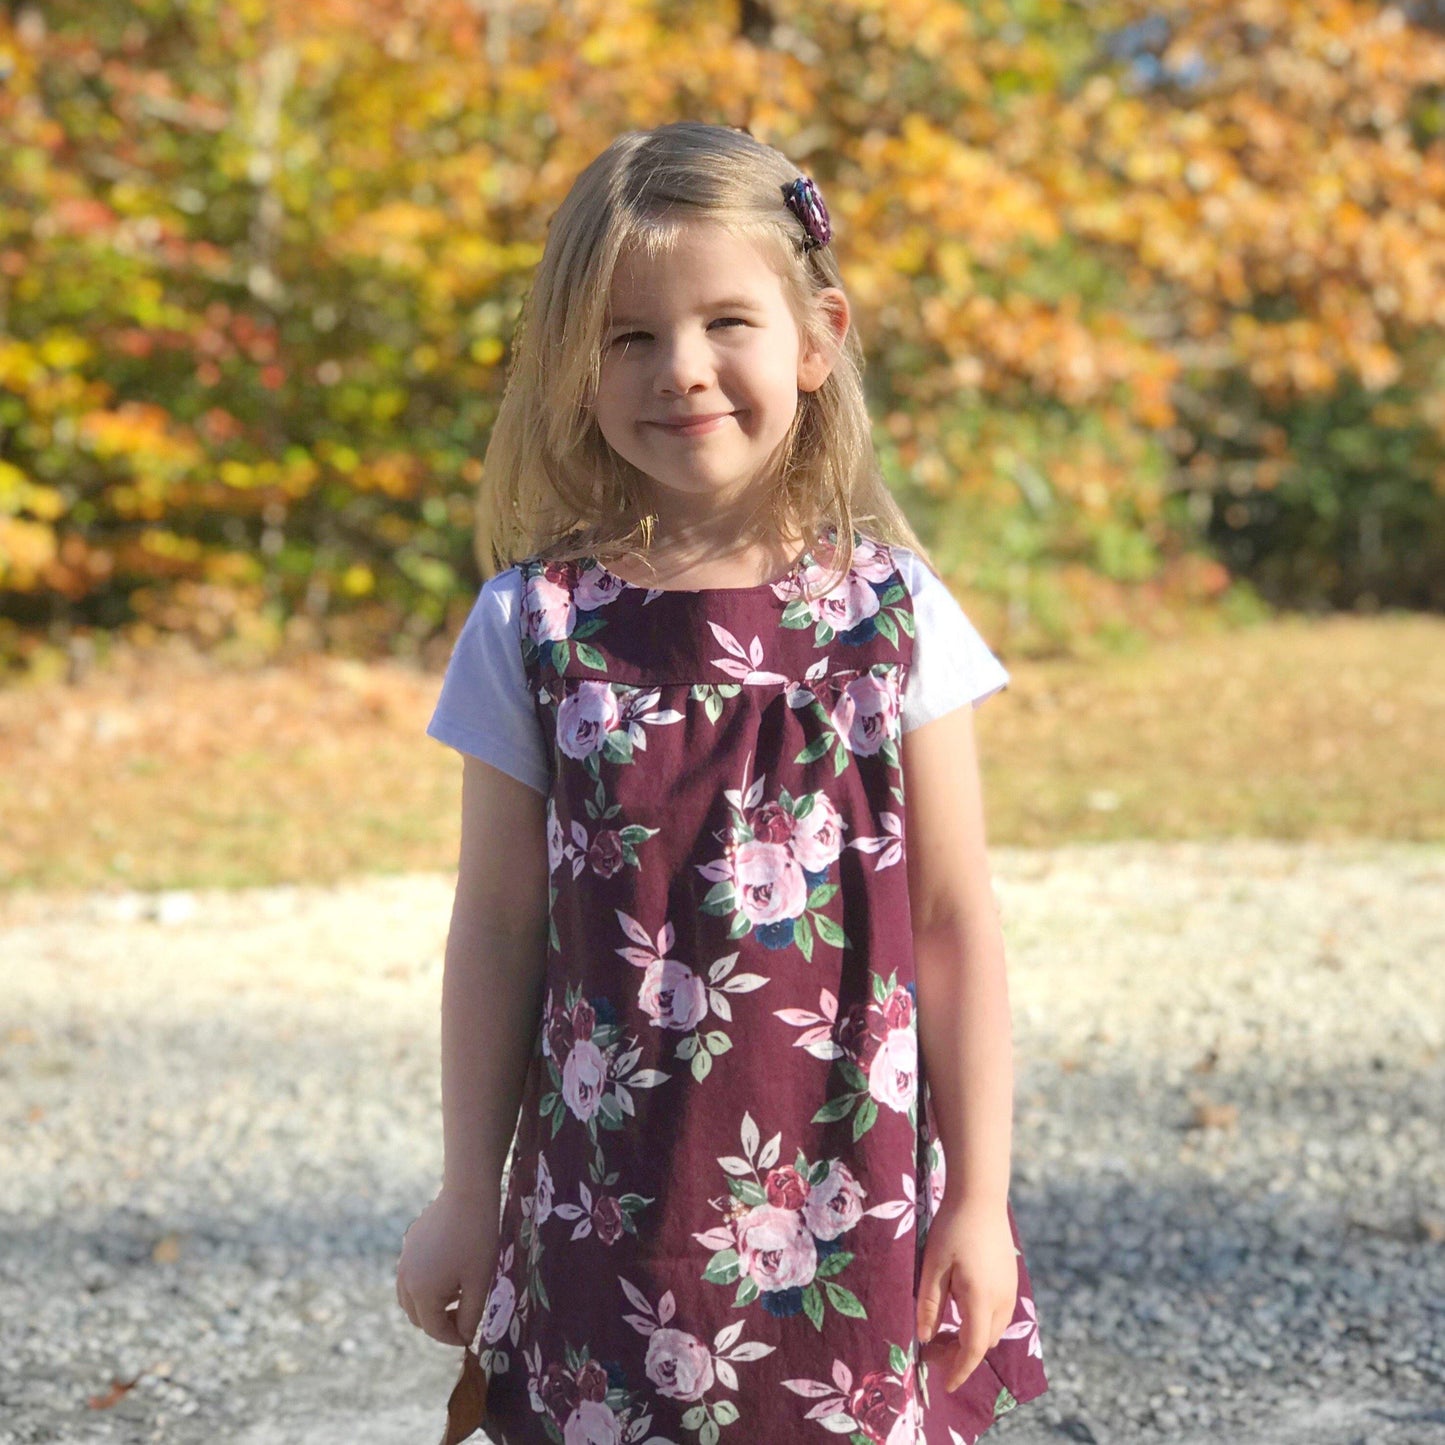 Burgundy Floral Elinor Shirt-Dress-Modesty n Mind-Girls' Clothing,Grow-with-me Clothing,Made to Order